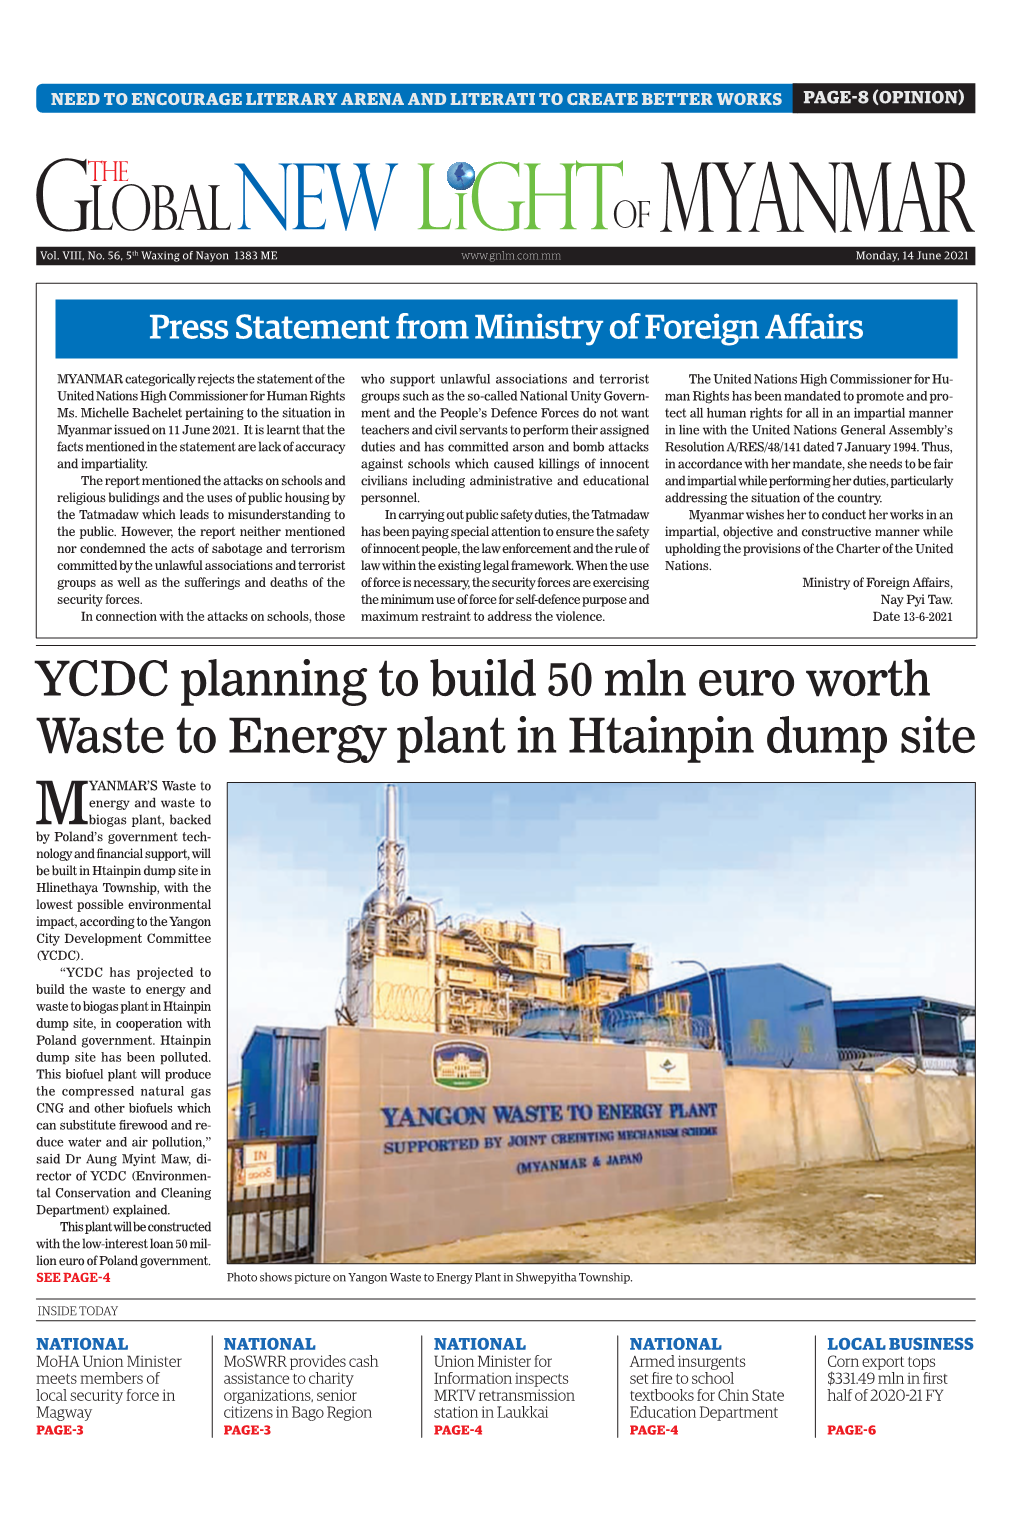 YCDC Planning to Build 50 Mln Euro Worth Waste to Energy Plant in Htainpin Dump Site